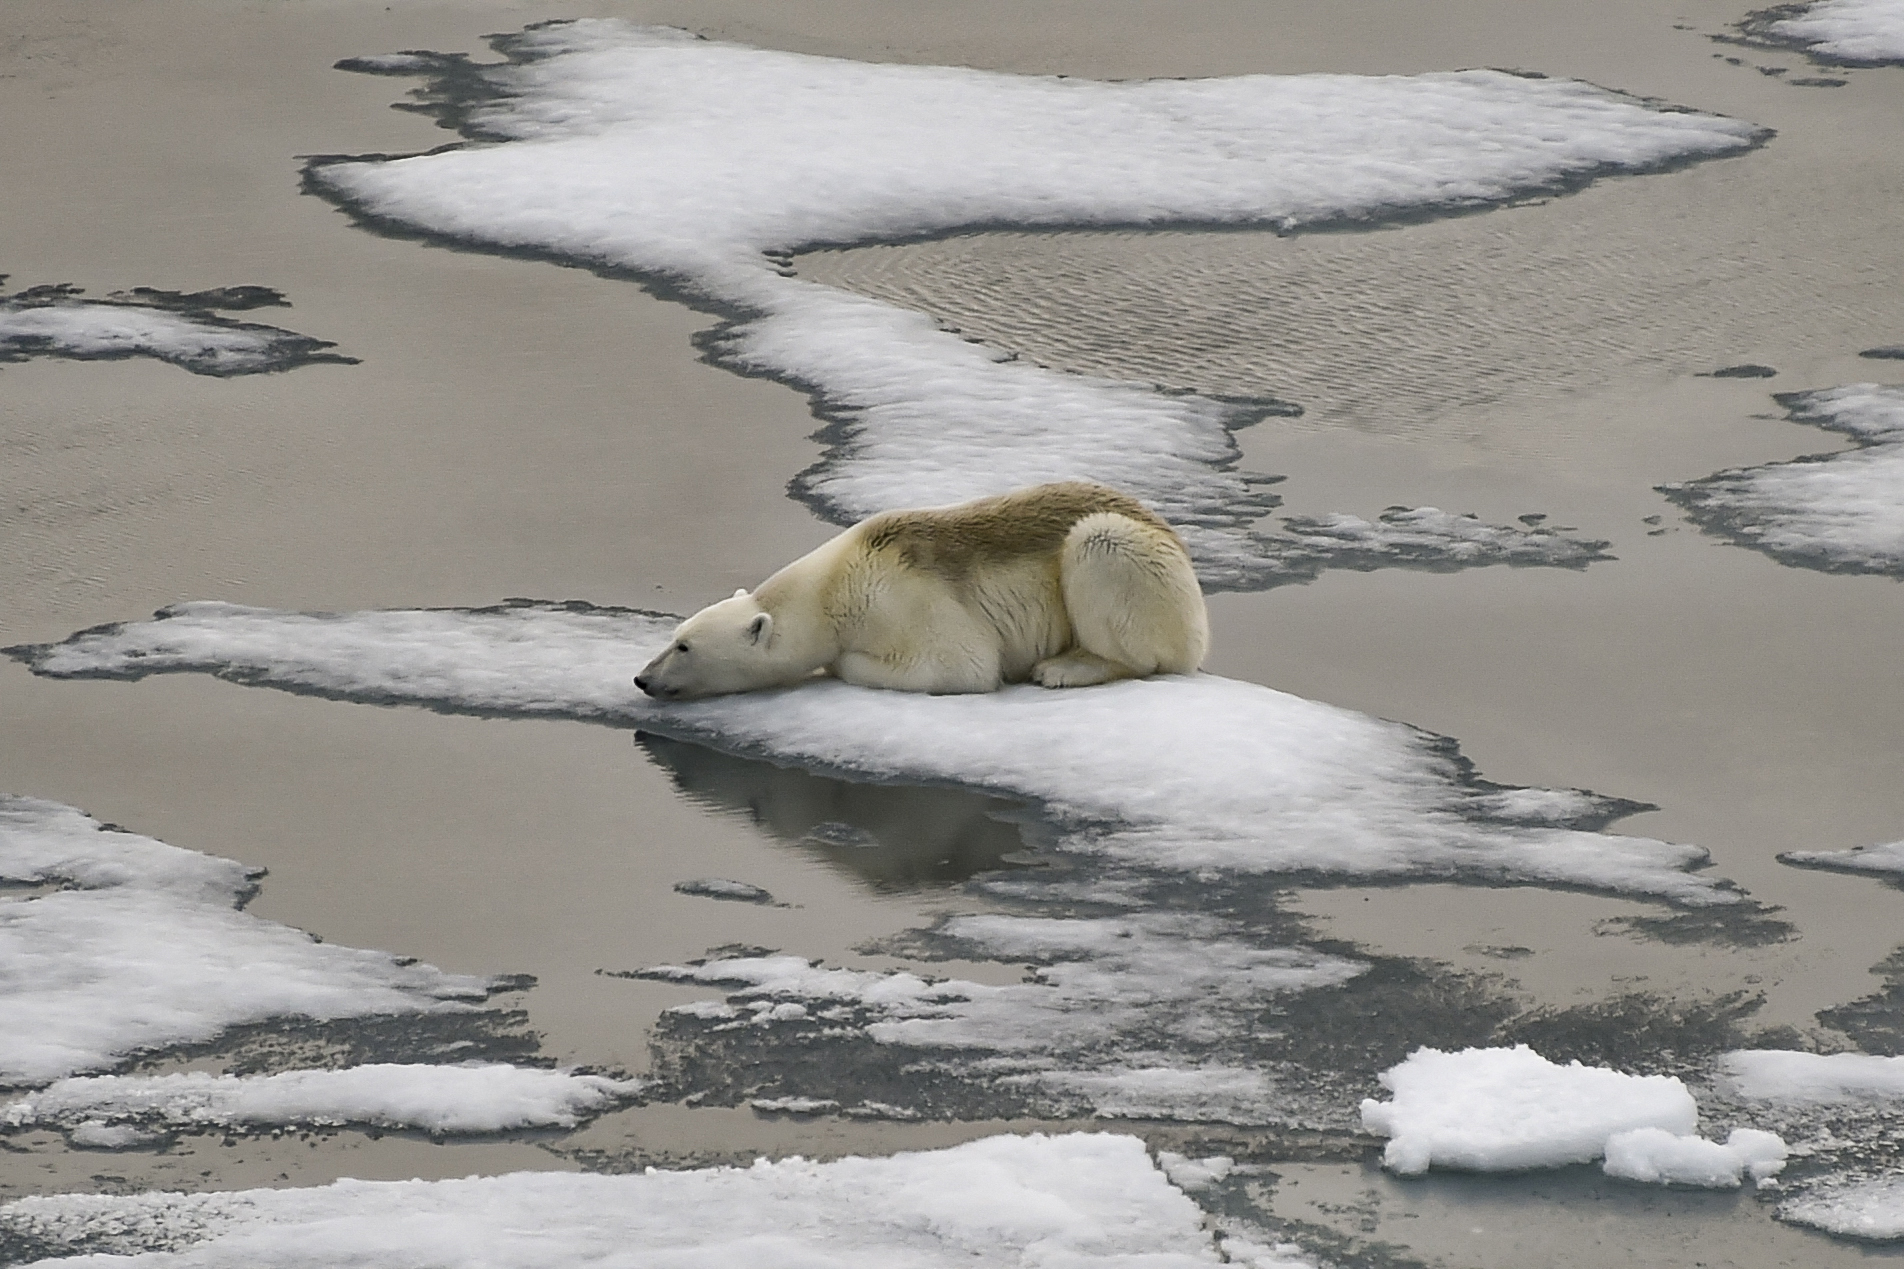 PHOTO: A polar bear is seen on ice floes in the British Channel in the Franz Josef Land archipelago, Aug. 16, 2021.